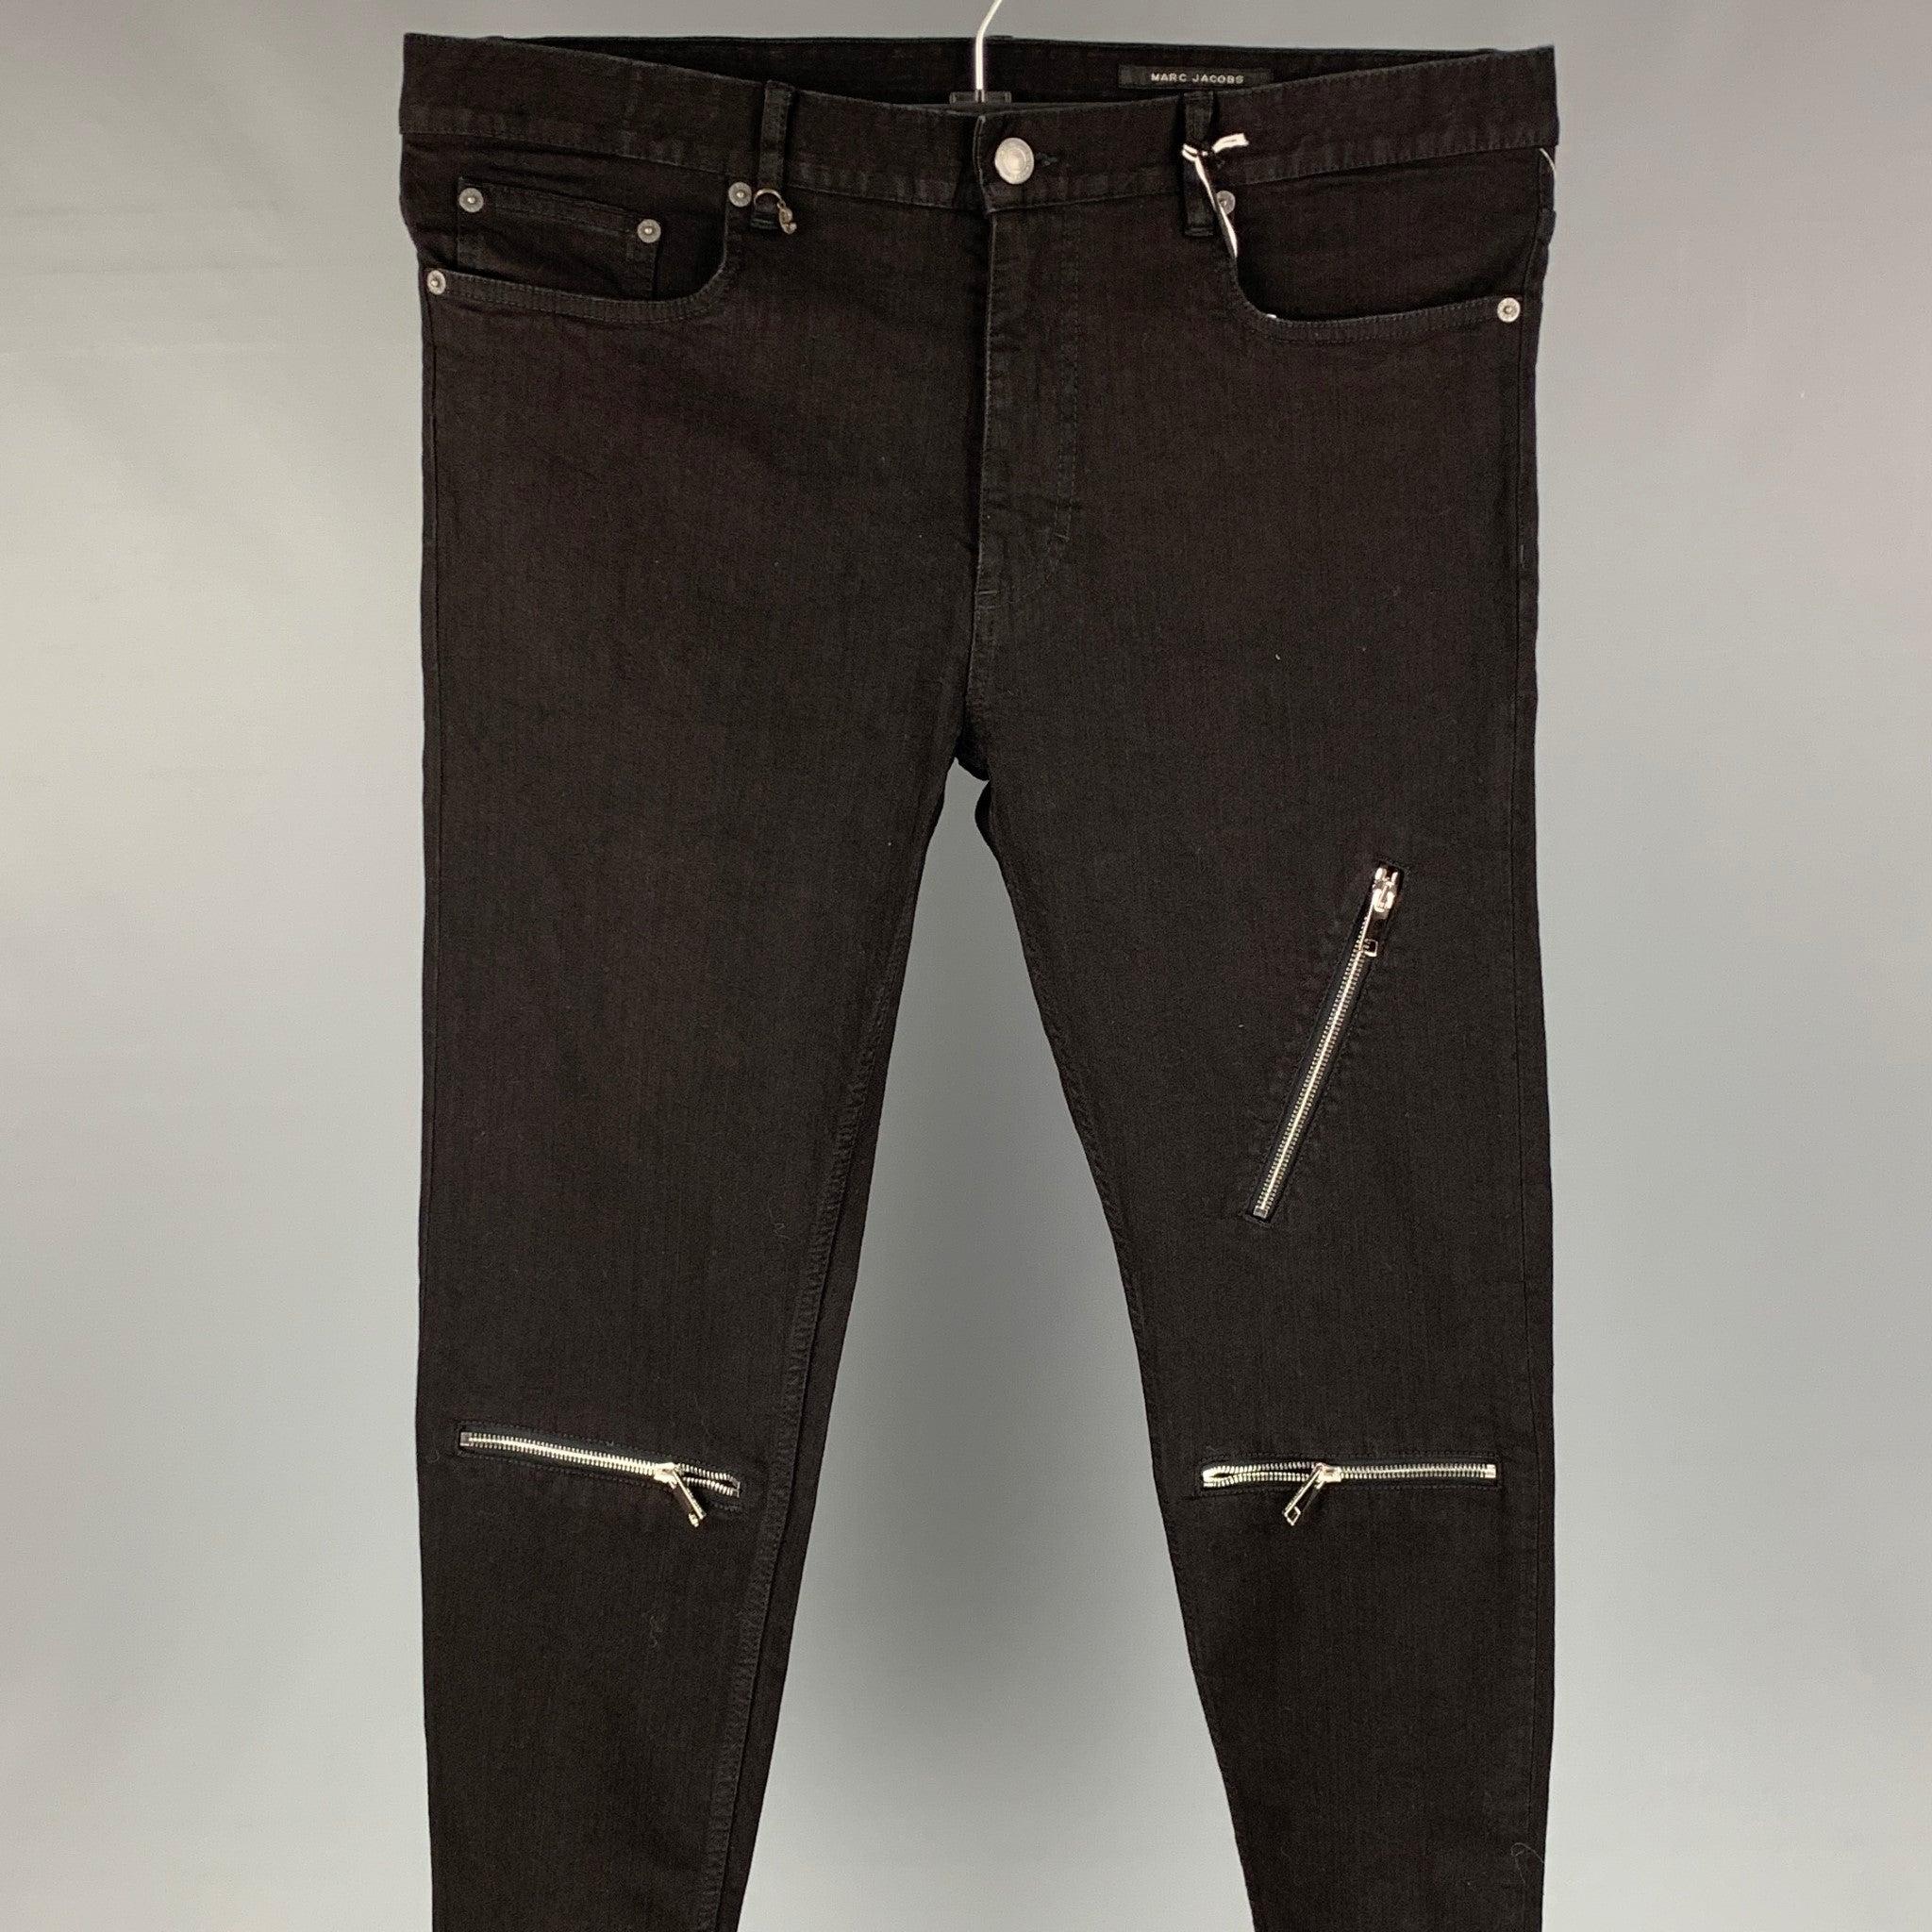 MARC JACOBS jeans comes in a black cotton featuring a slim fit, exposed zippers, and a zip fly closure. Made in Italy.
New With Tags.
 

Marked:   52 

Measurements: 
  Waist: 36 inches  Rise: 11 inches  Inseam: 32 inches 
  
  
 
Reference: